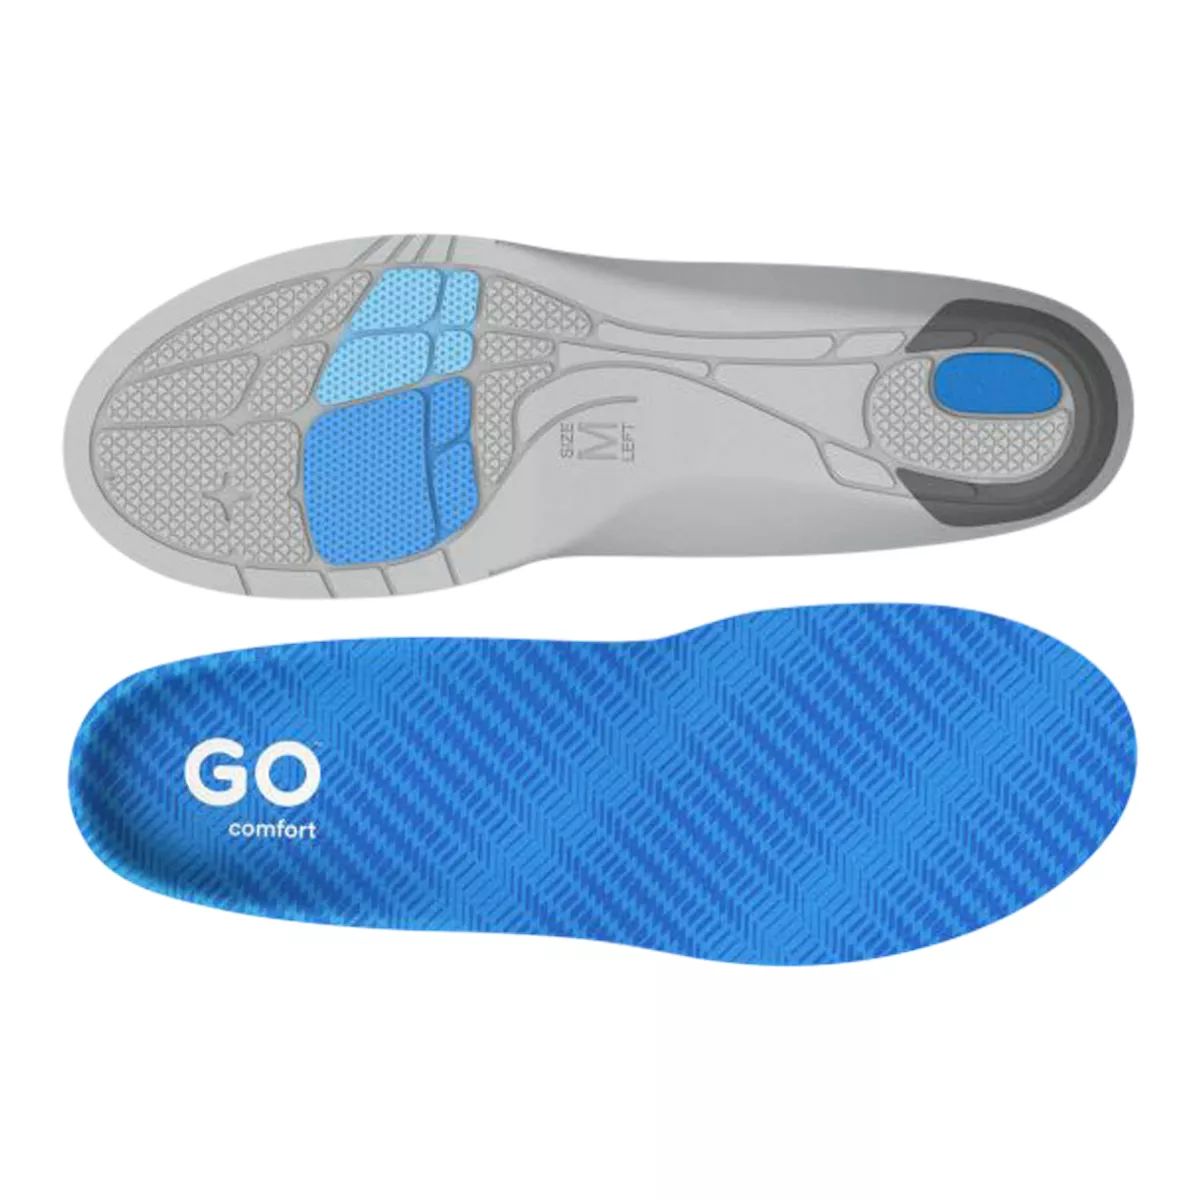 Superfeet Go Comfort Athletic Insoles  Shoe Inserts